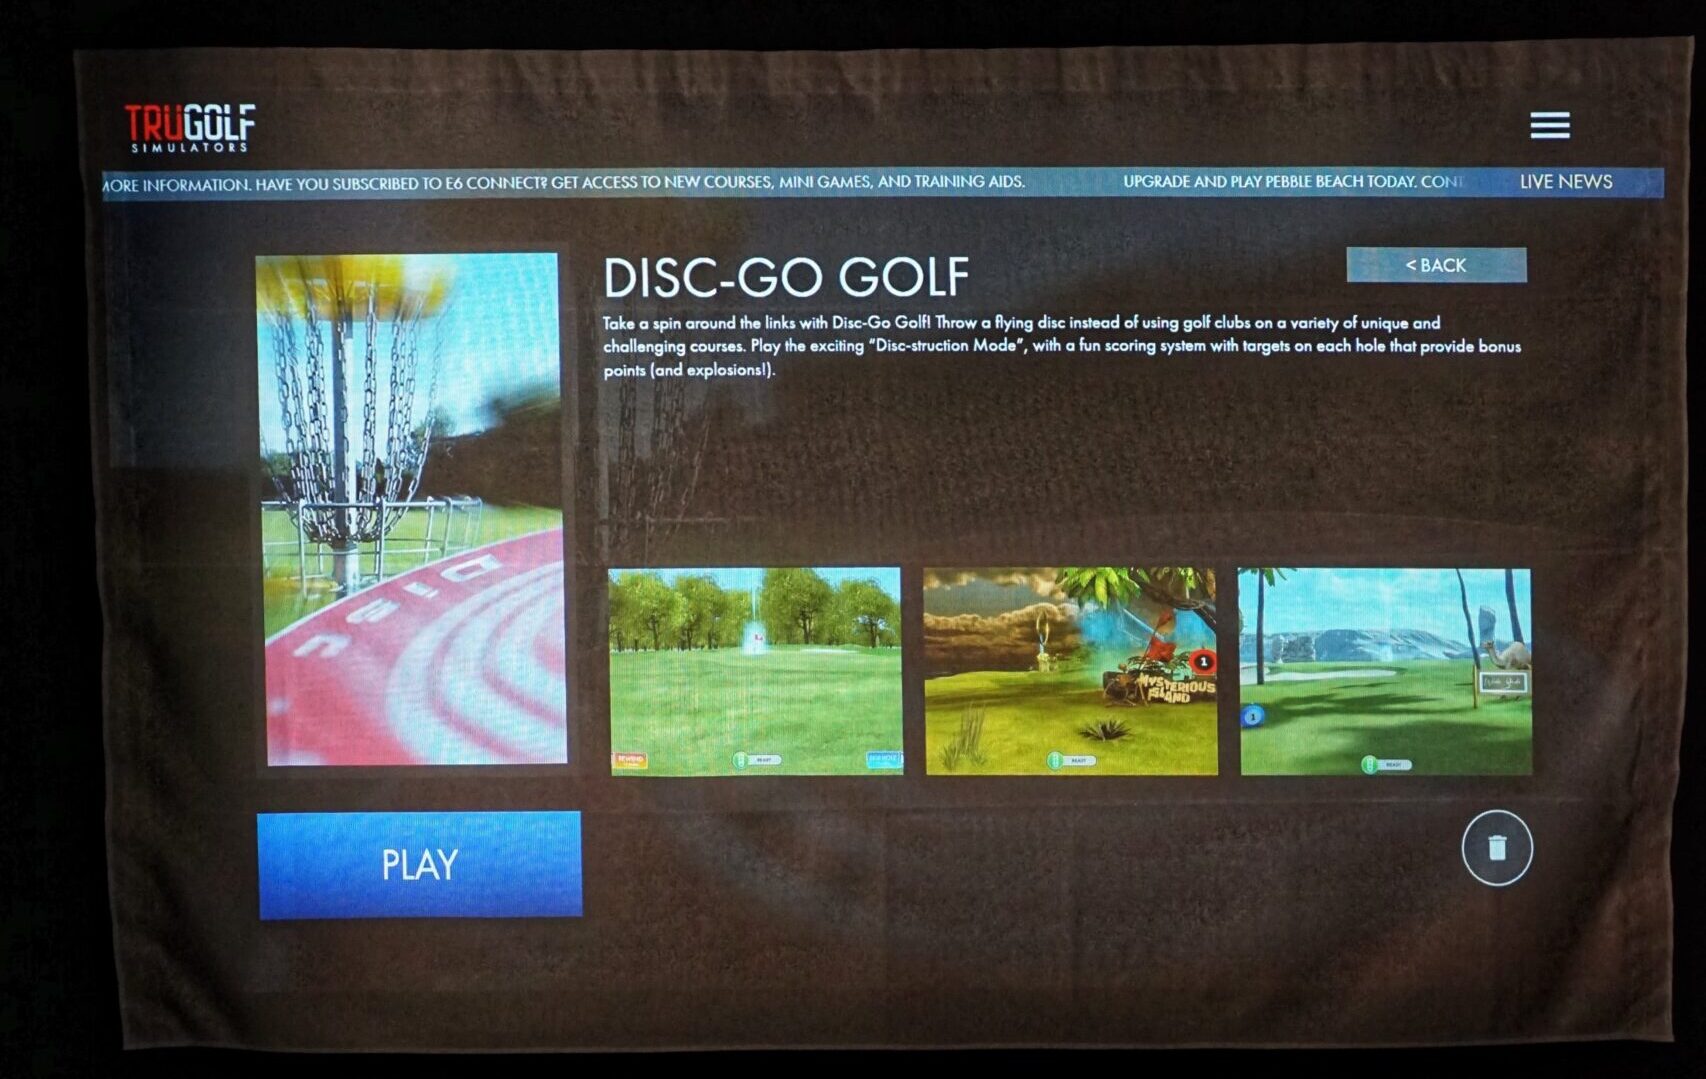 Disc golf simulator game screen displaying a virtual disc golf course with a player aiming for a distant target